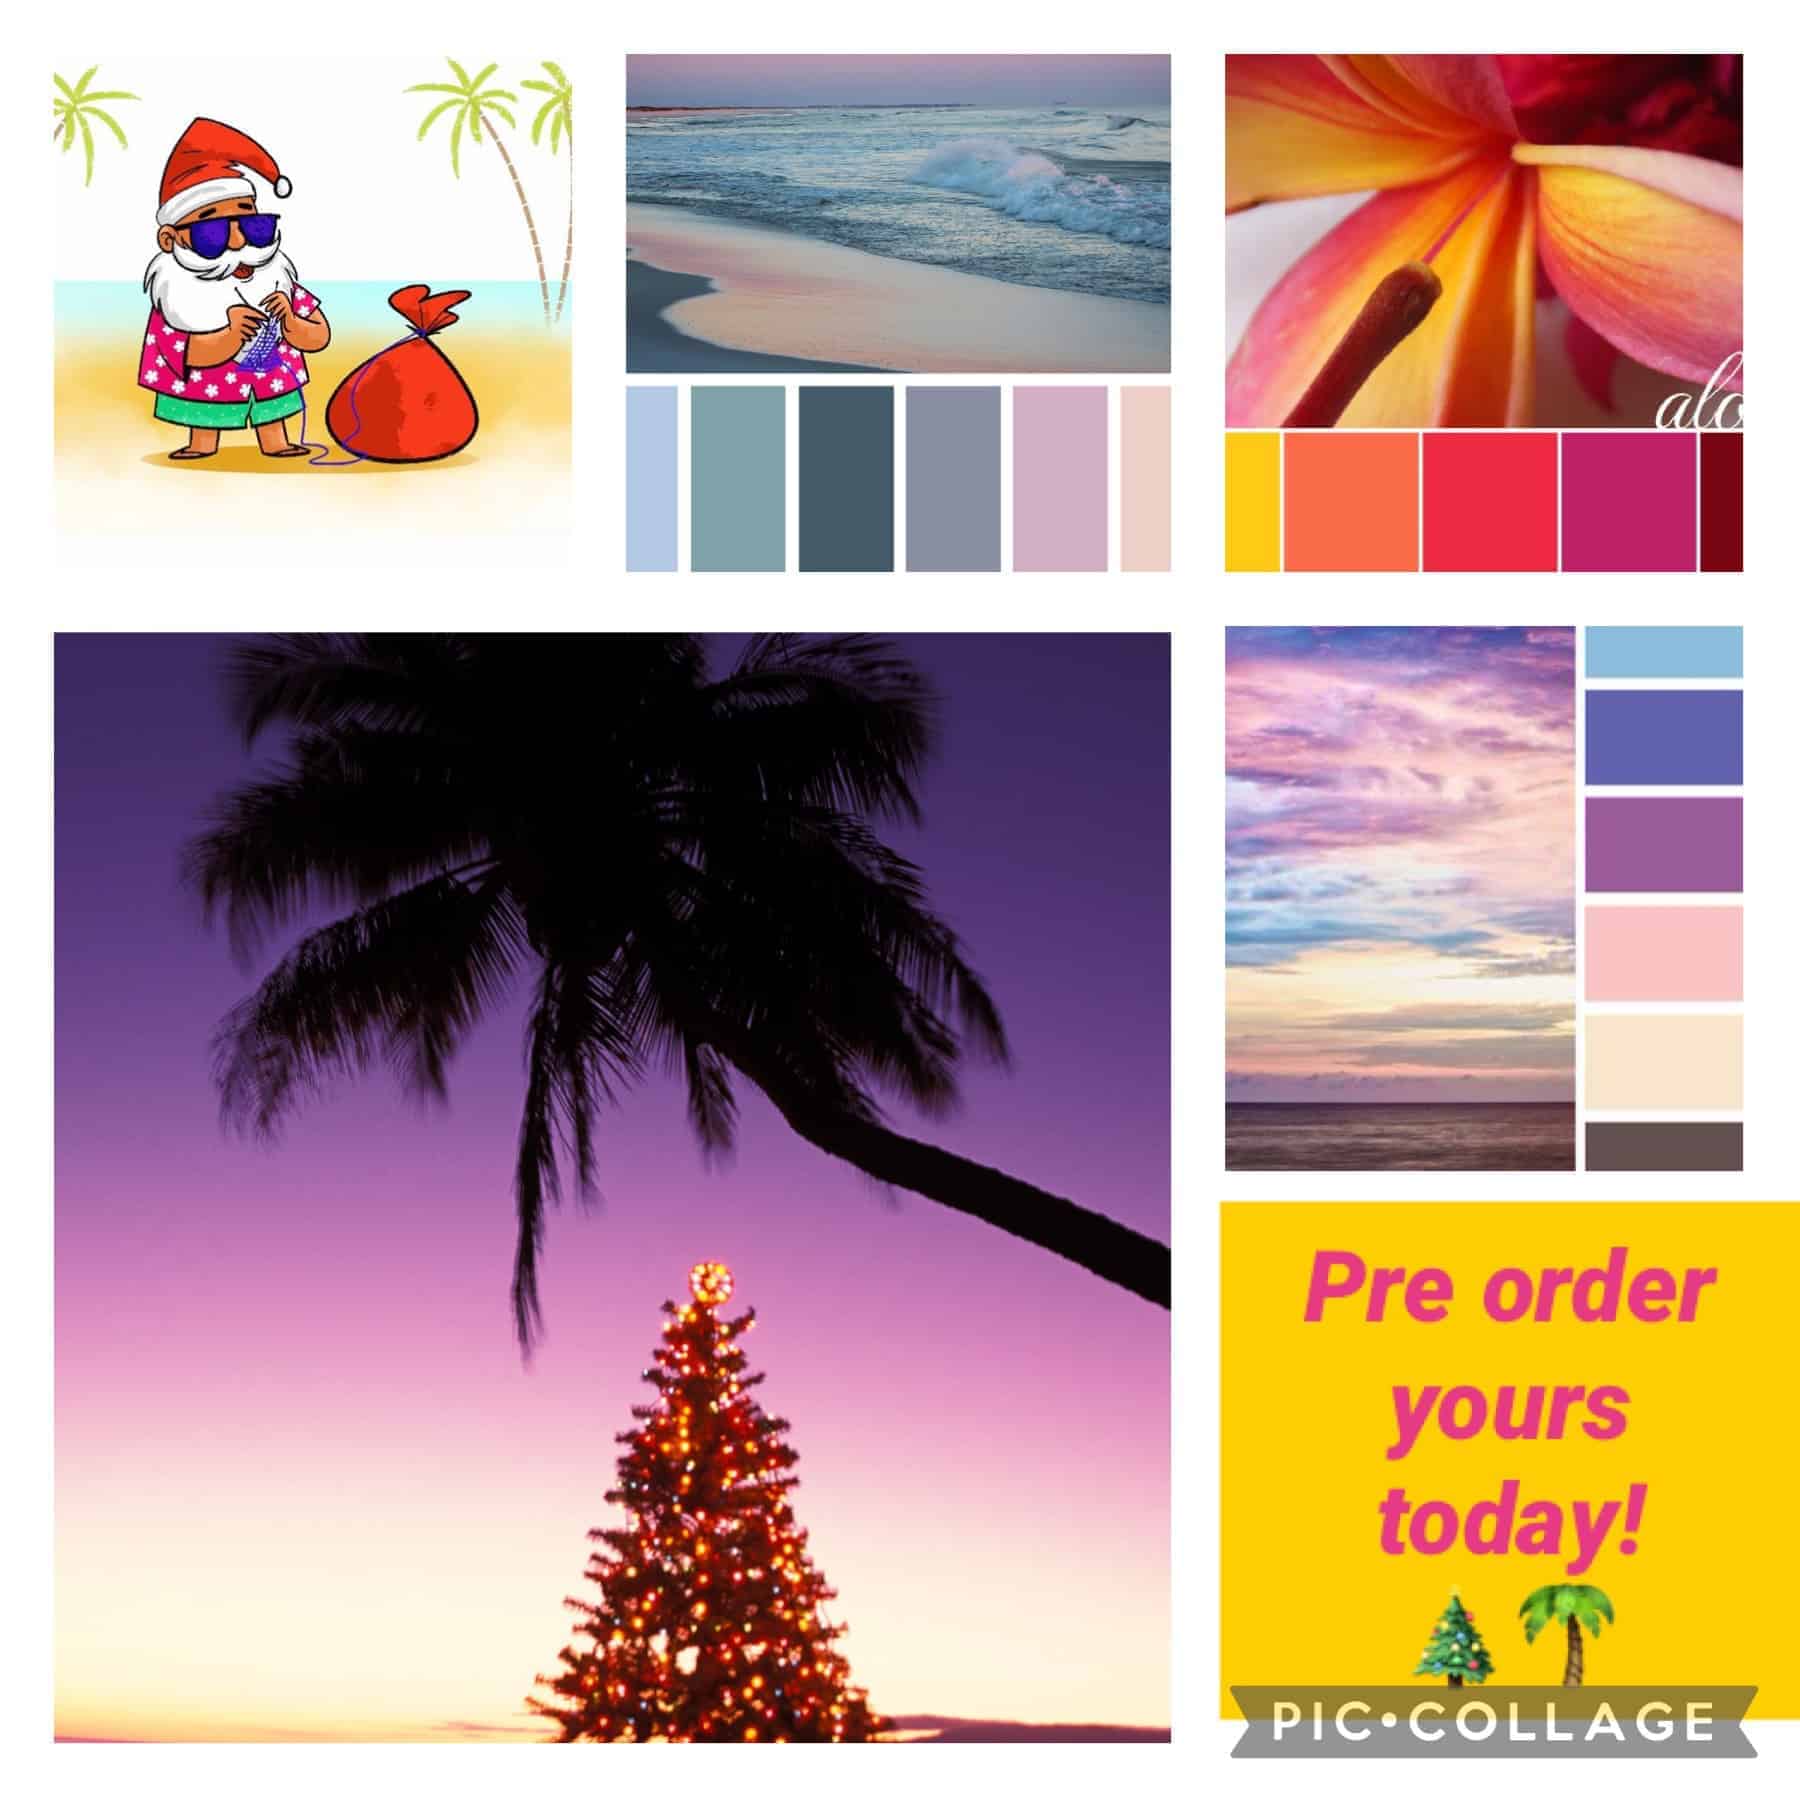 A collage with Santa on a beach and a Christmas tree under a palm tree.